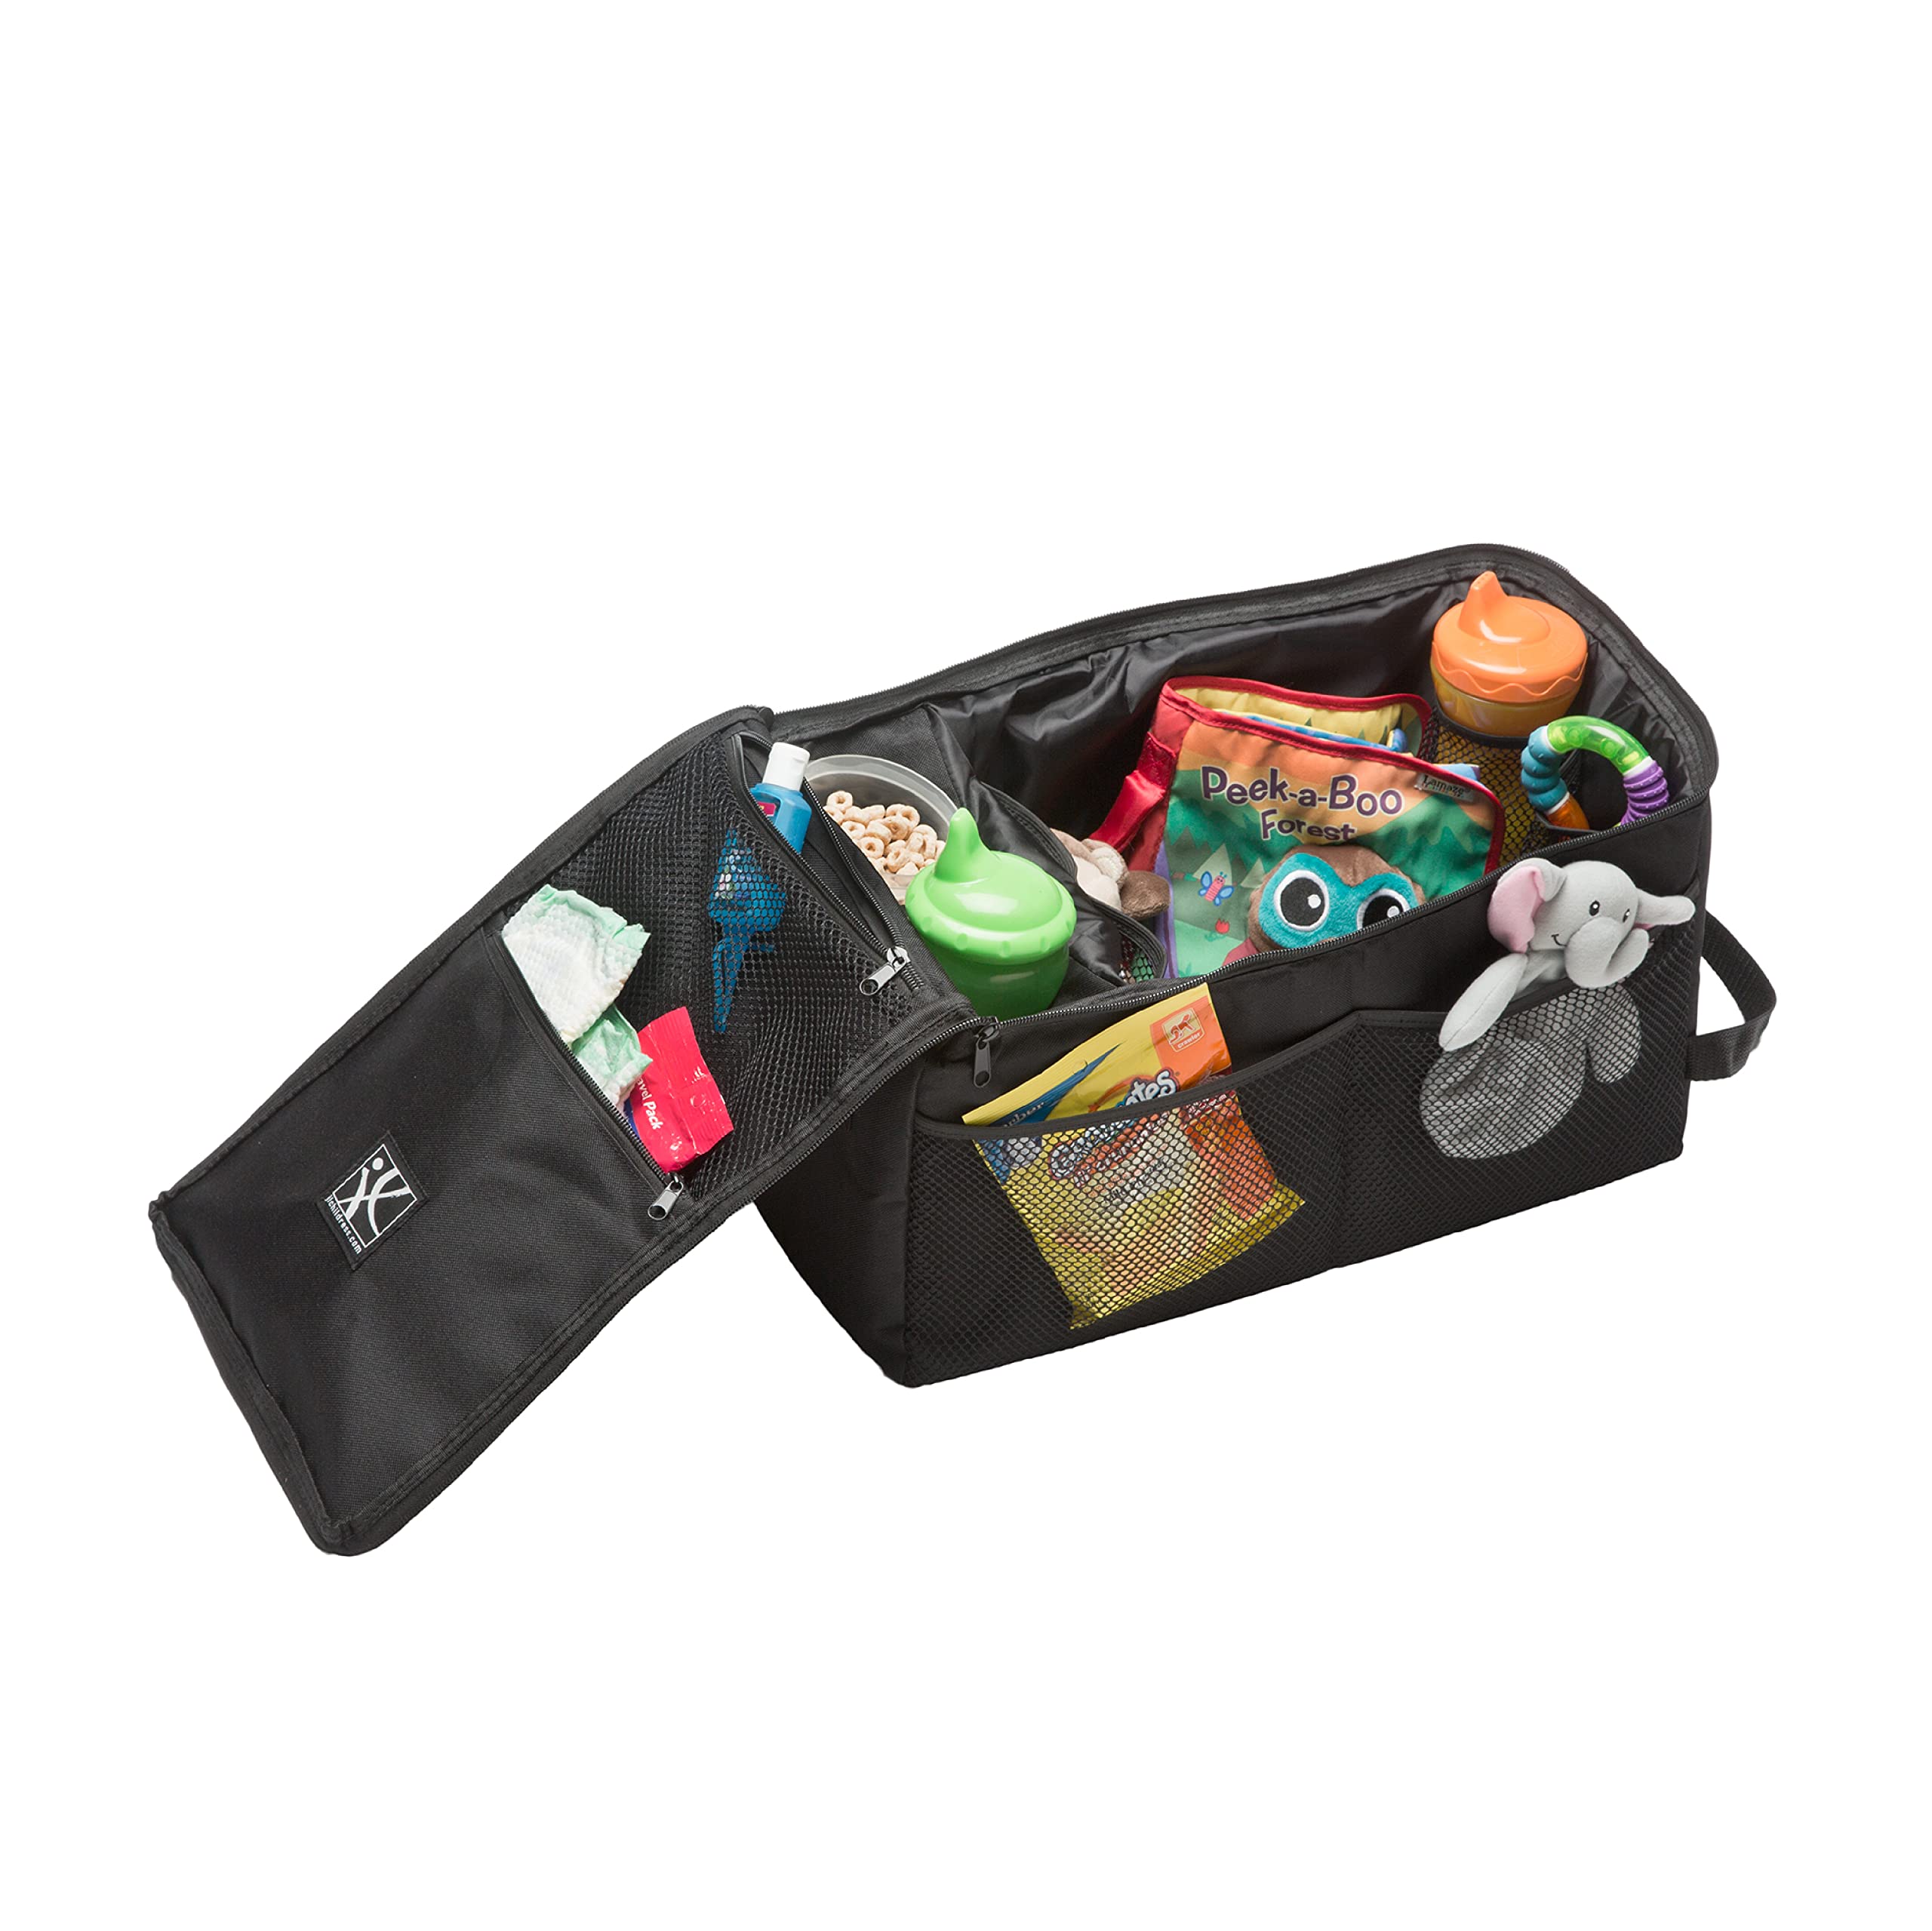 J.L. Childress Backseat Butler Car Organizer, Storage for Kids Drinks, Snacks, Bottles, and Toys. Includes 2 Cupholders and 10 Side Pockets, Portable and Easy to Clean, Black